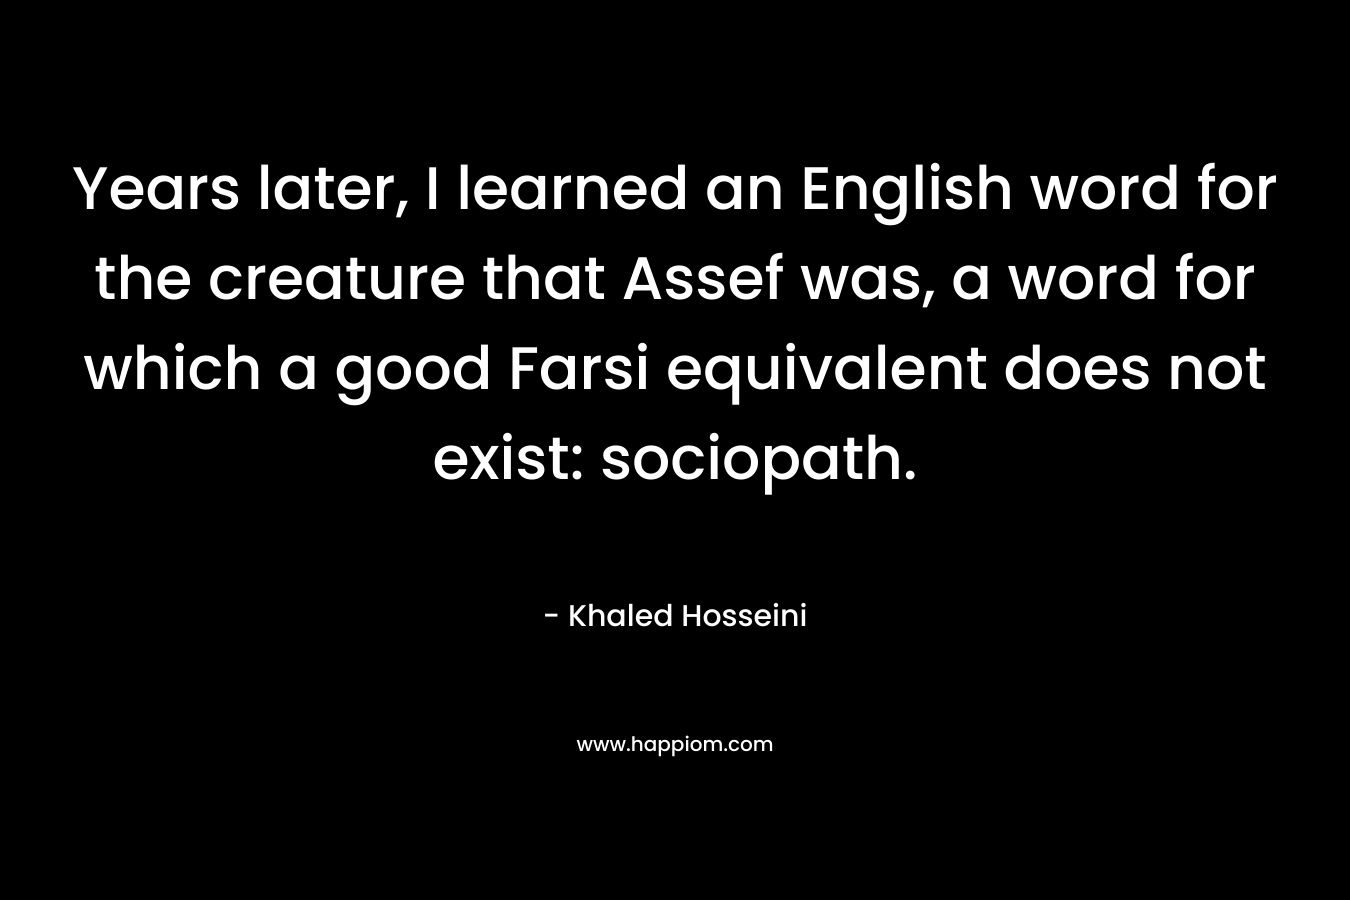 Years later, I learned an English word for the creature that Assef was, a word for which a good Farsi equivalent does not exist: sociopath. – Khaled Hosseini